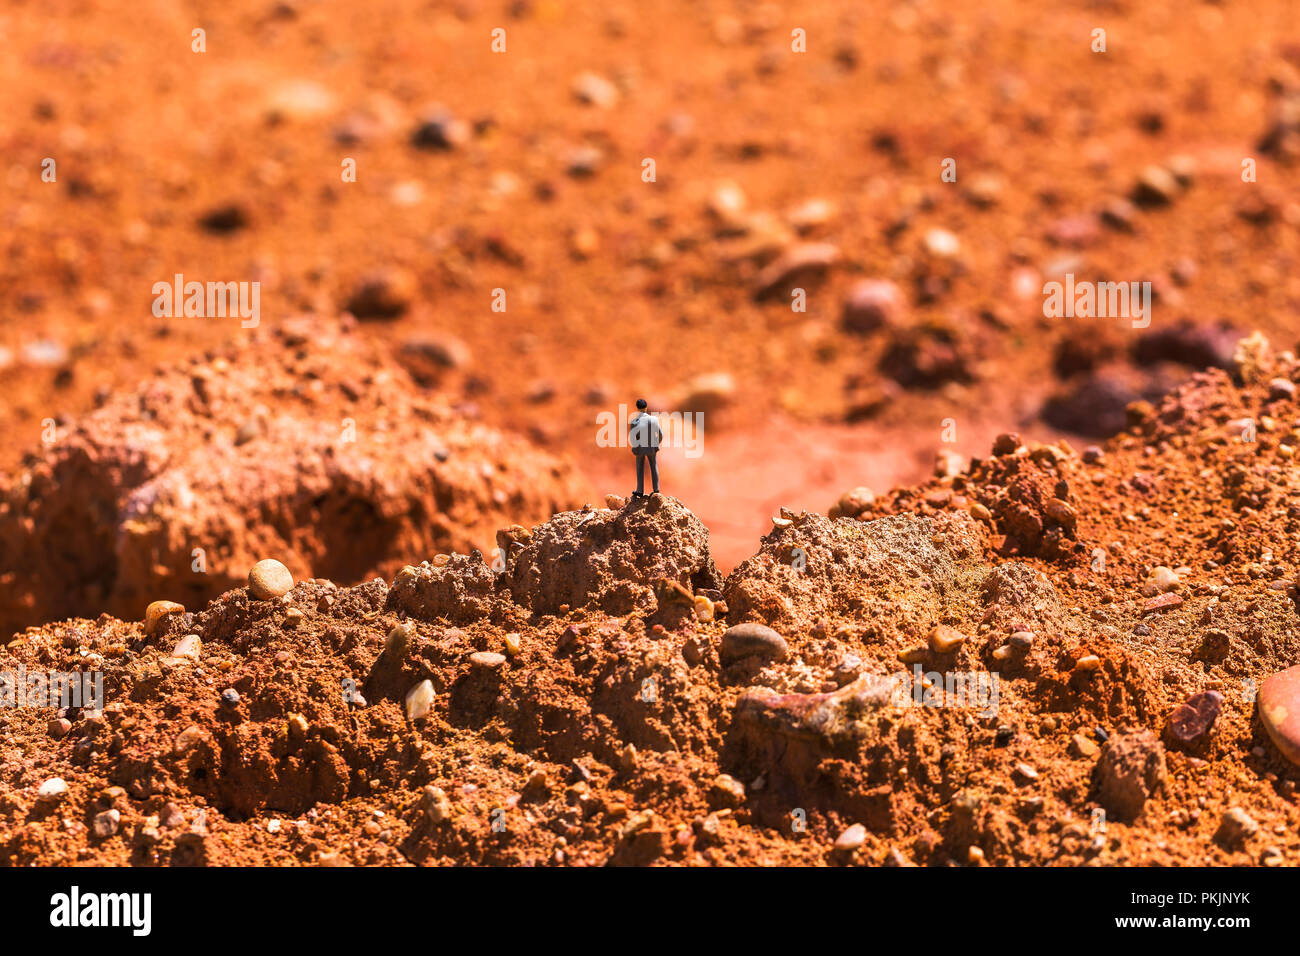 Business man on the rocky area is rocky. Imagine doing business on Mars. Stock Photo